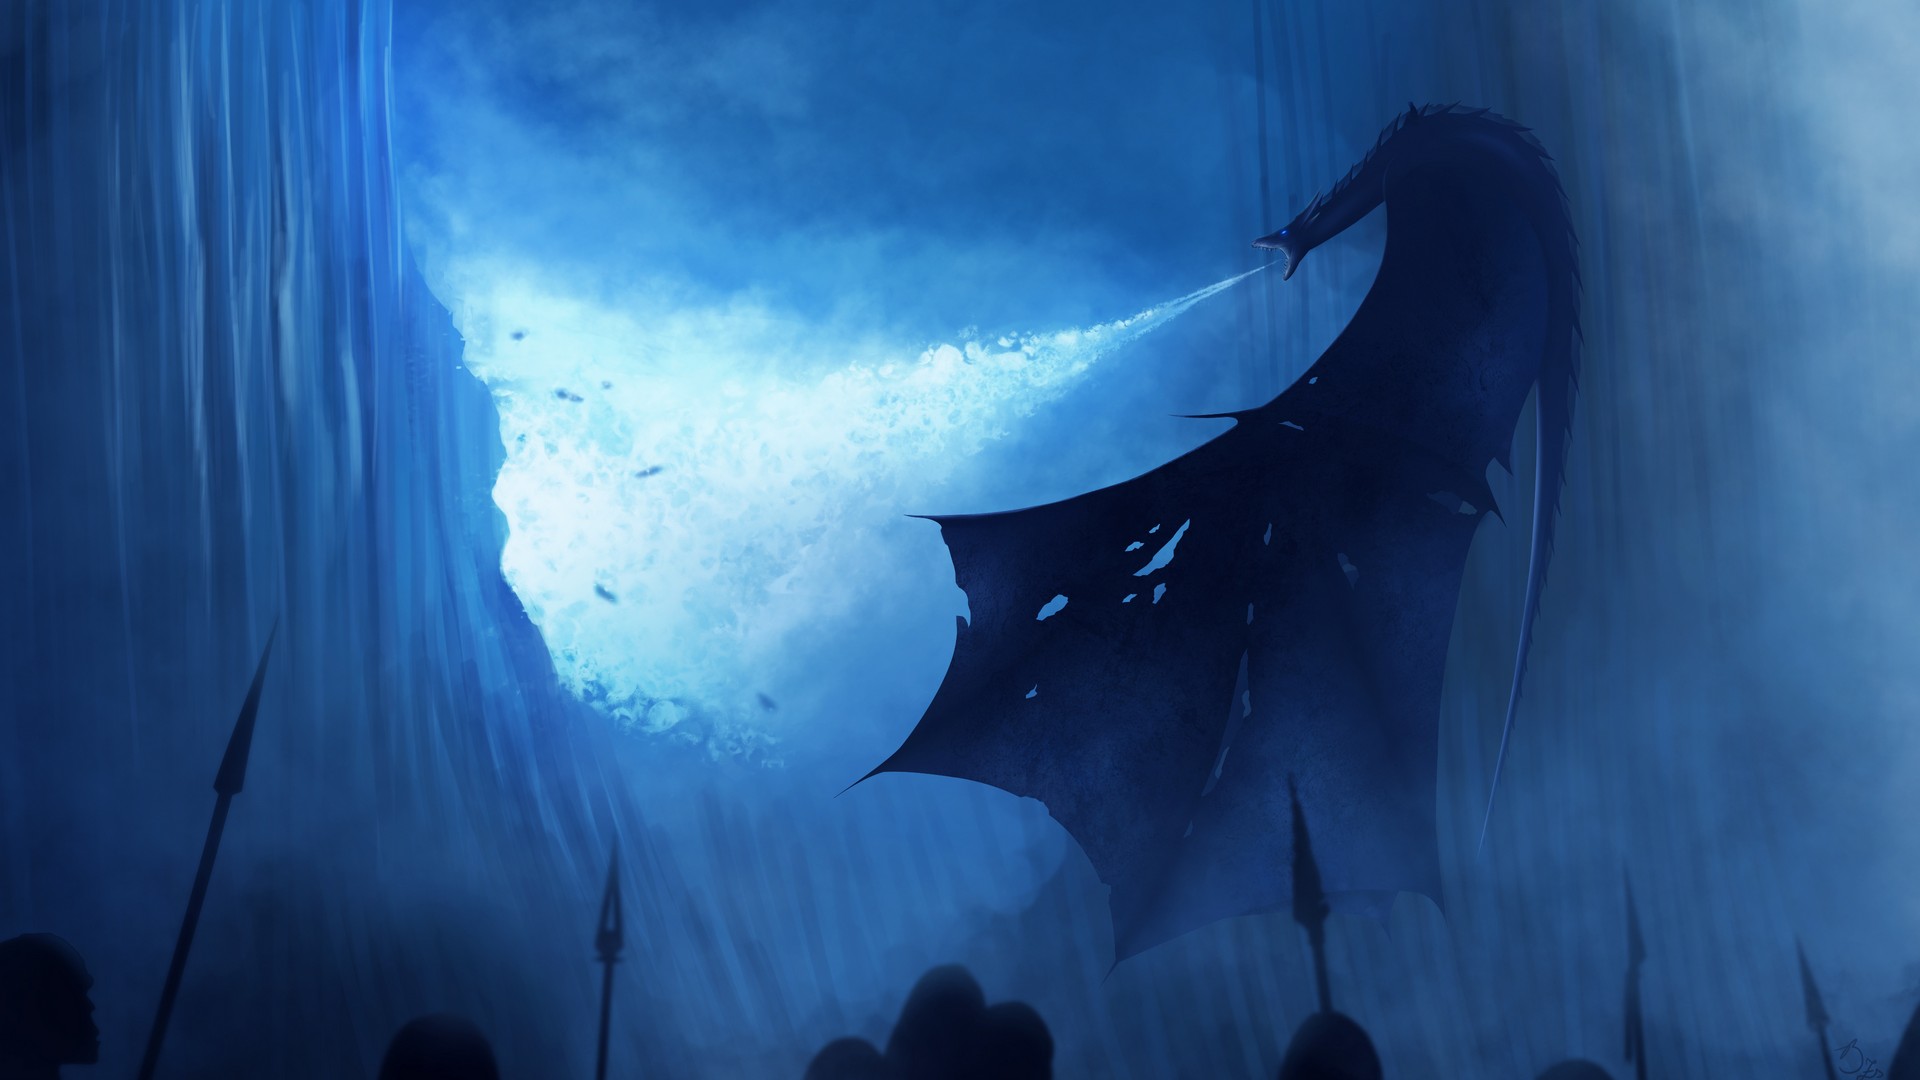 Game of Thrones 8 Season Trailer Wallpaper with high-resolution 1920x1080 pixel. You can use this poster wallpaper for your Desktop Computers, Mac Screensavers, Windows Backgrounds, iPhone Wallpapers, Tablet or Android Lock screen and another Mobile device